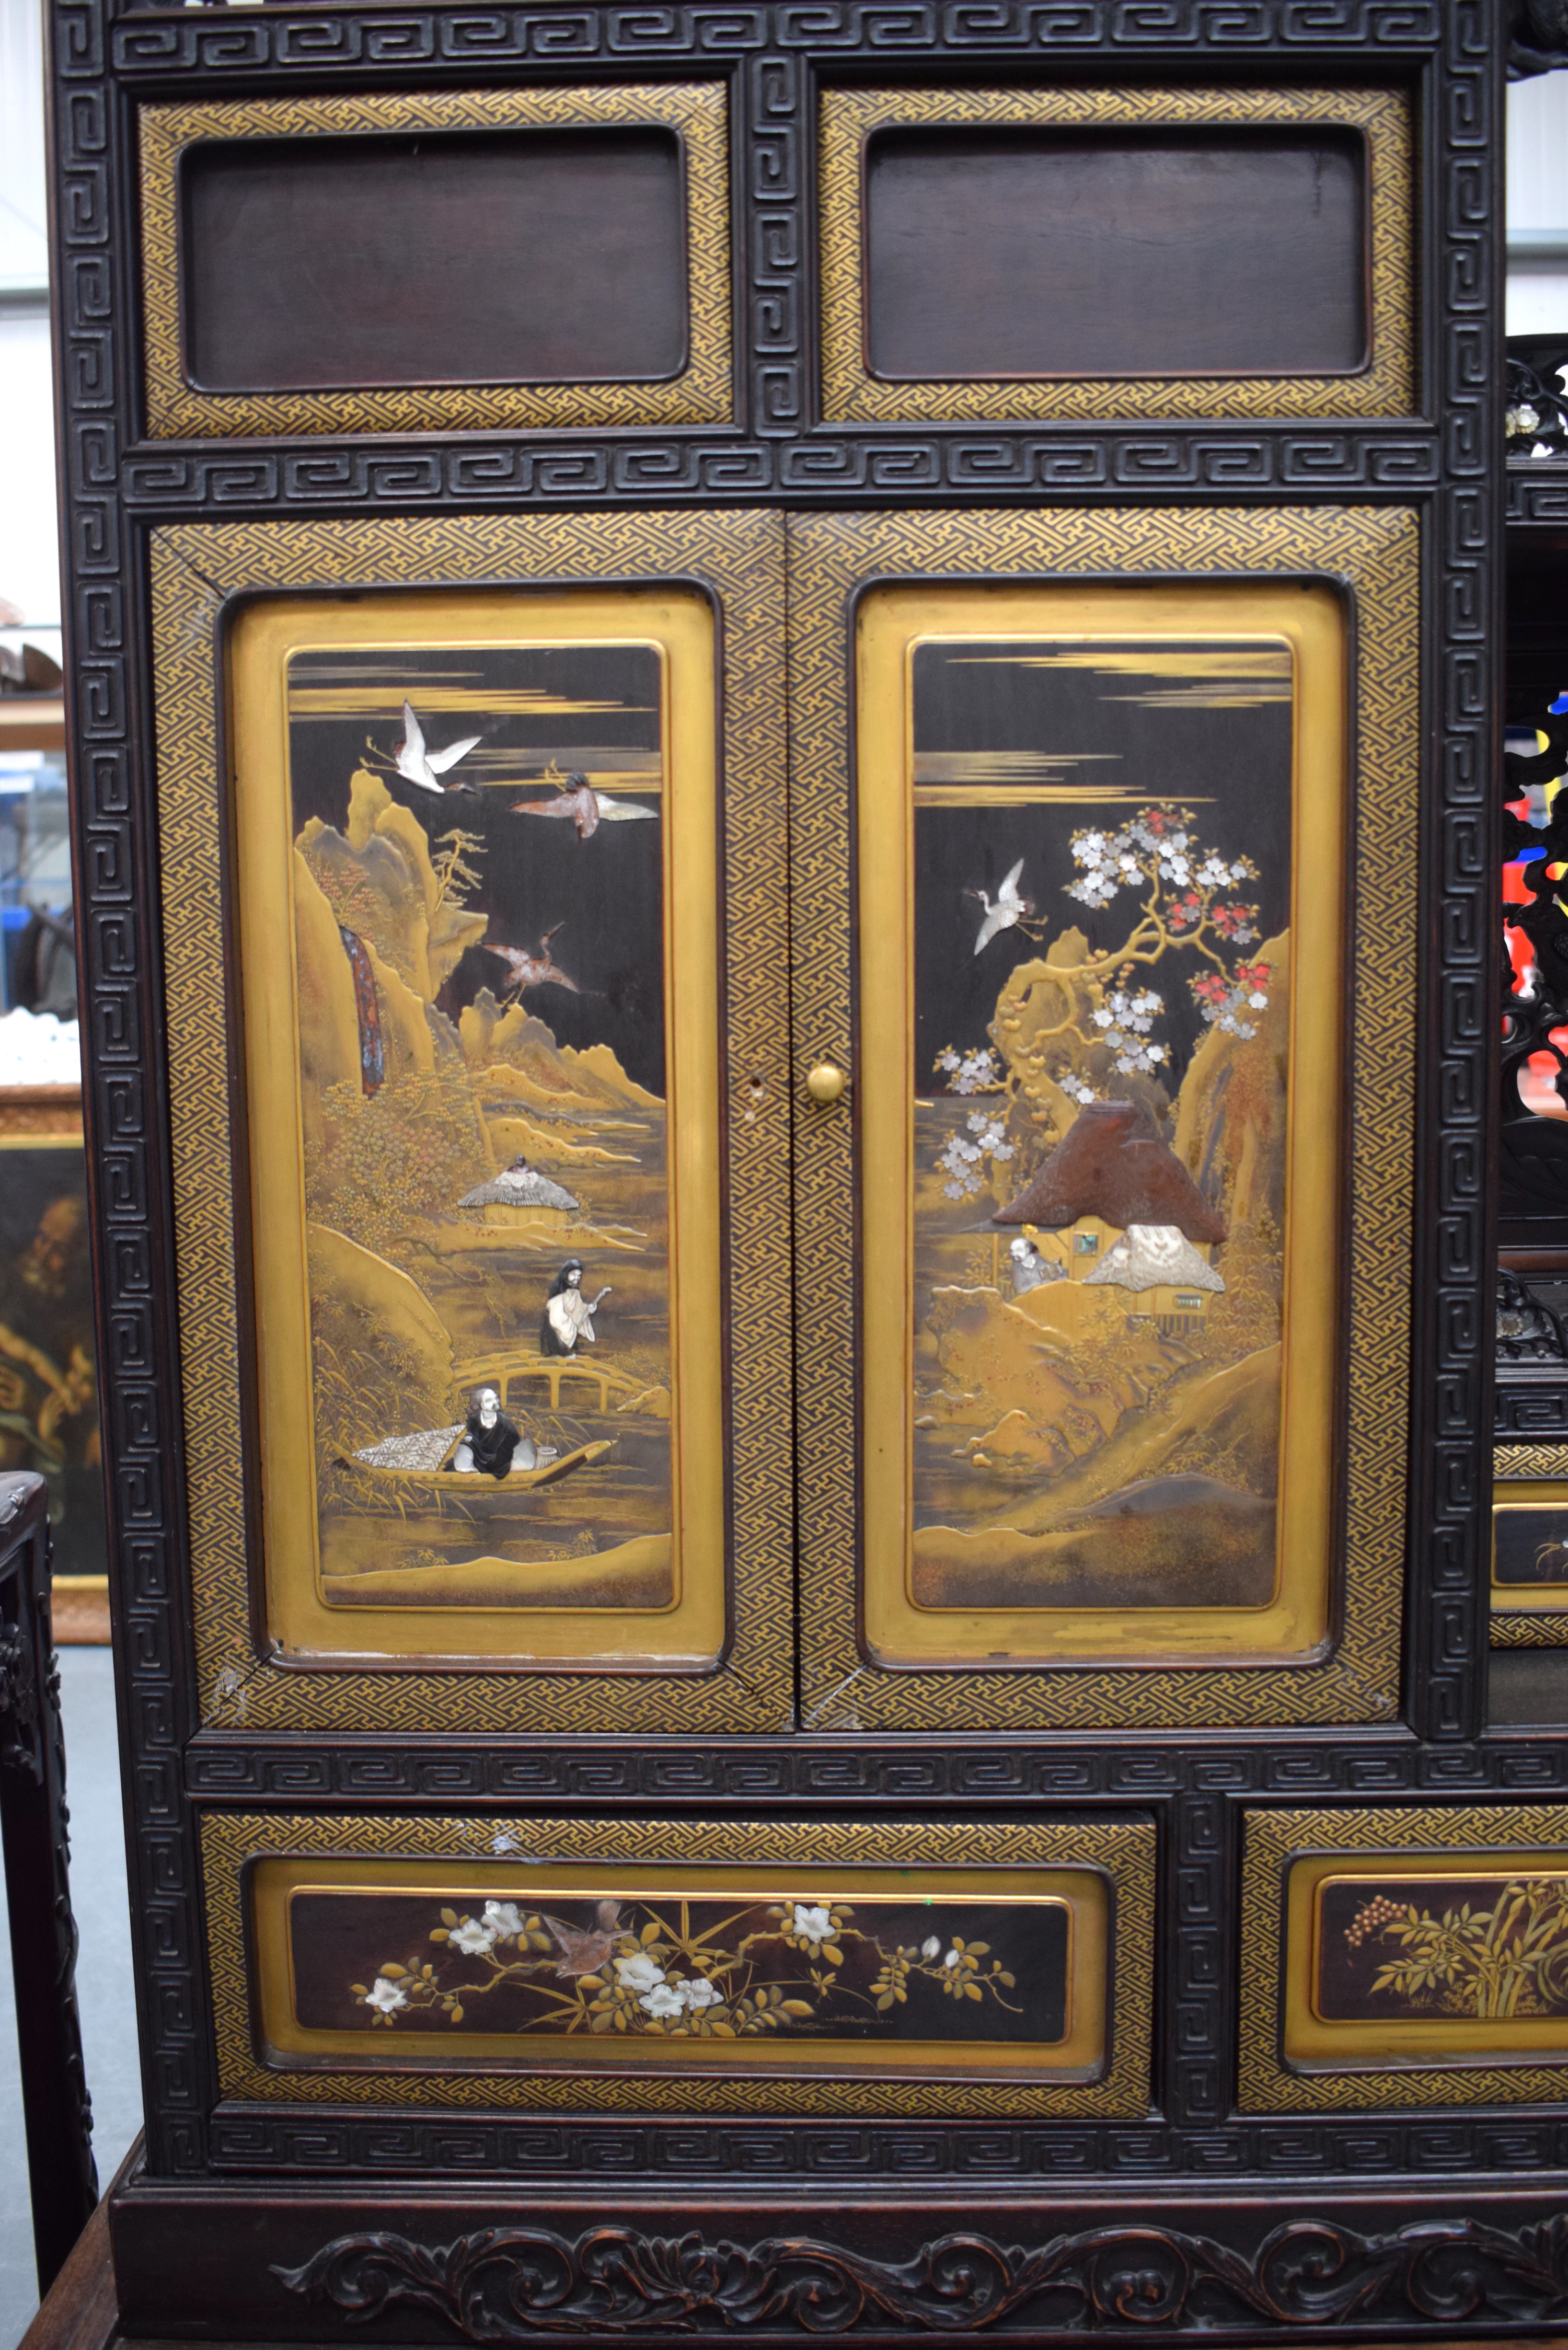 A VERY LARGE 19TH CENTURY JAPANESE MEIJI PERIOD SHIBAYAMA LACQUER AND IVORY DISPLAY CABINET decorate - Image 6 of 11